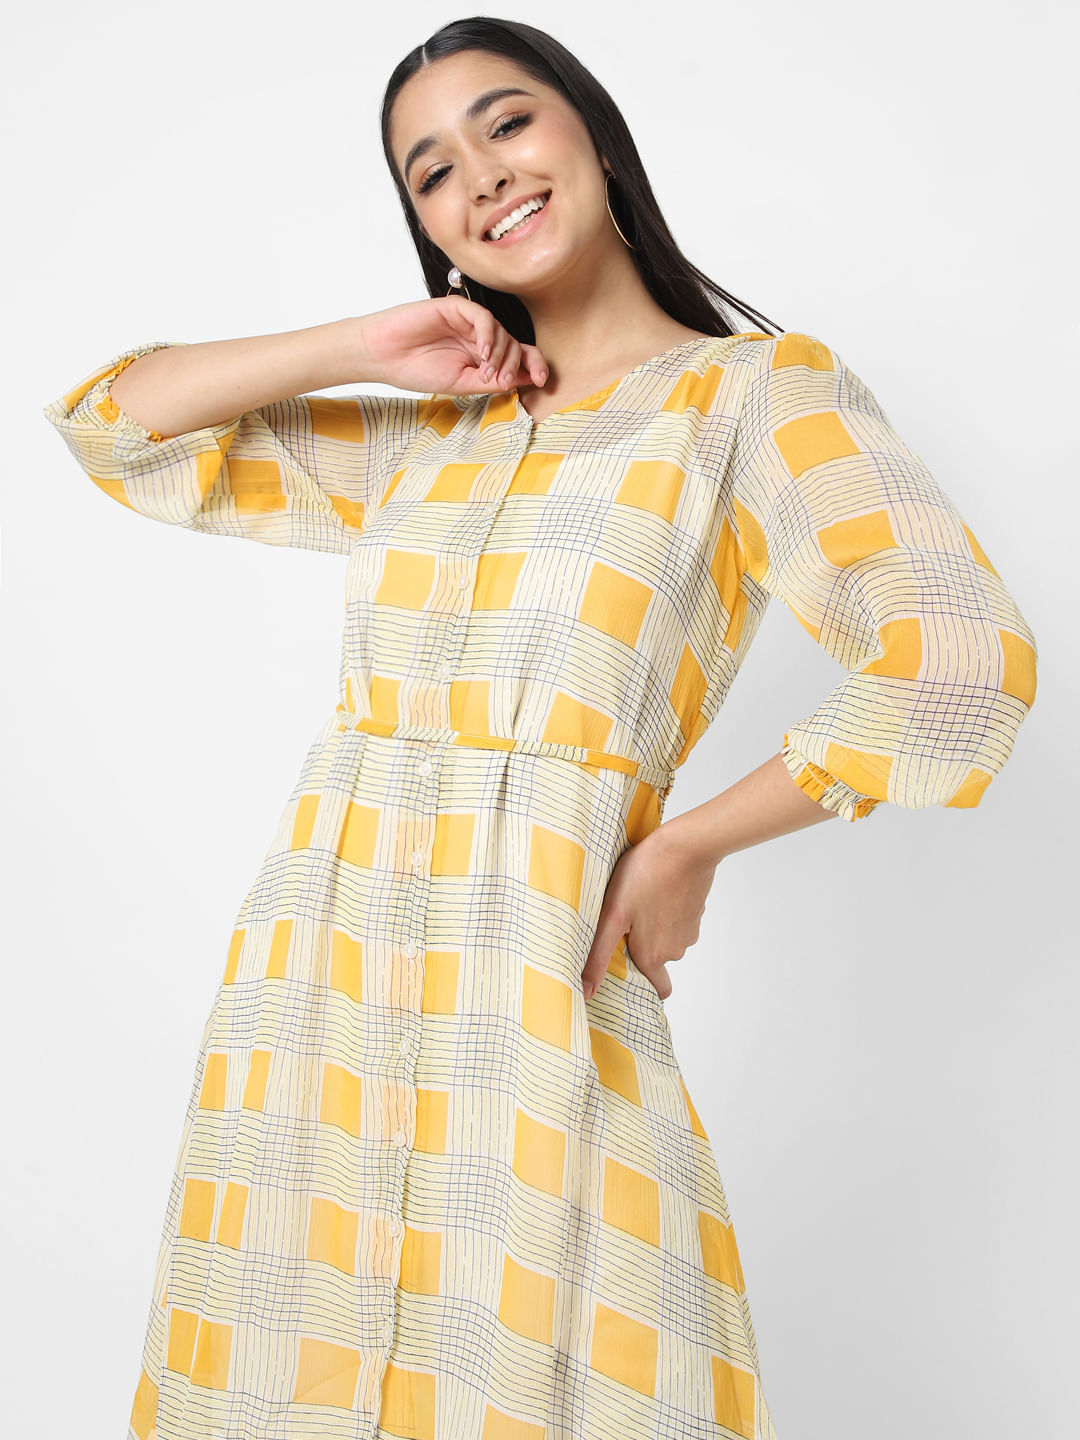 Buy ZOLA Frock Style Checks Kurti with Pockets for Women Yellow at Amazon.in